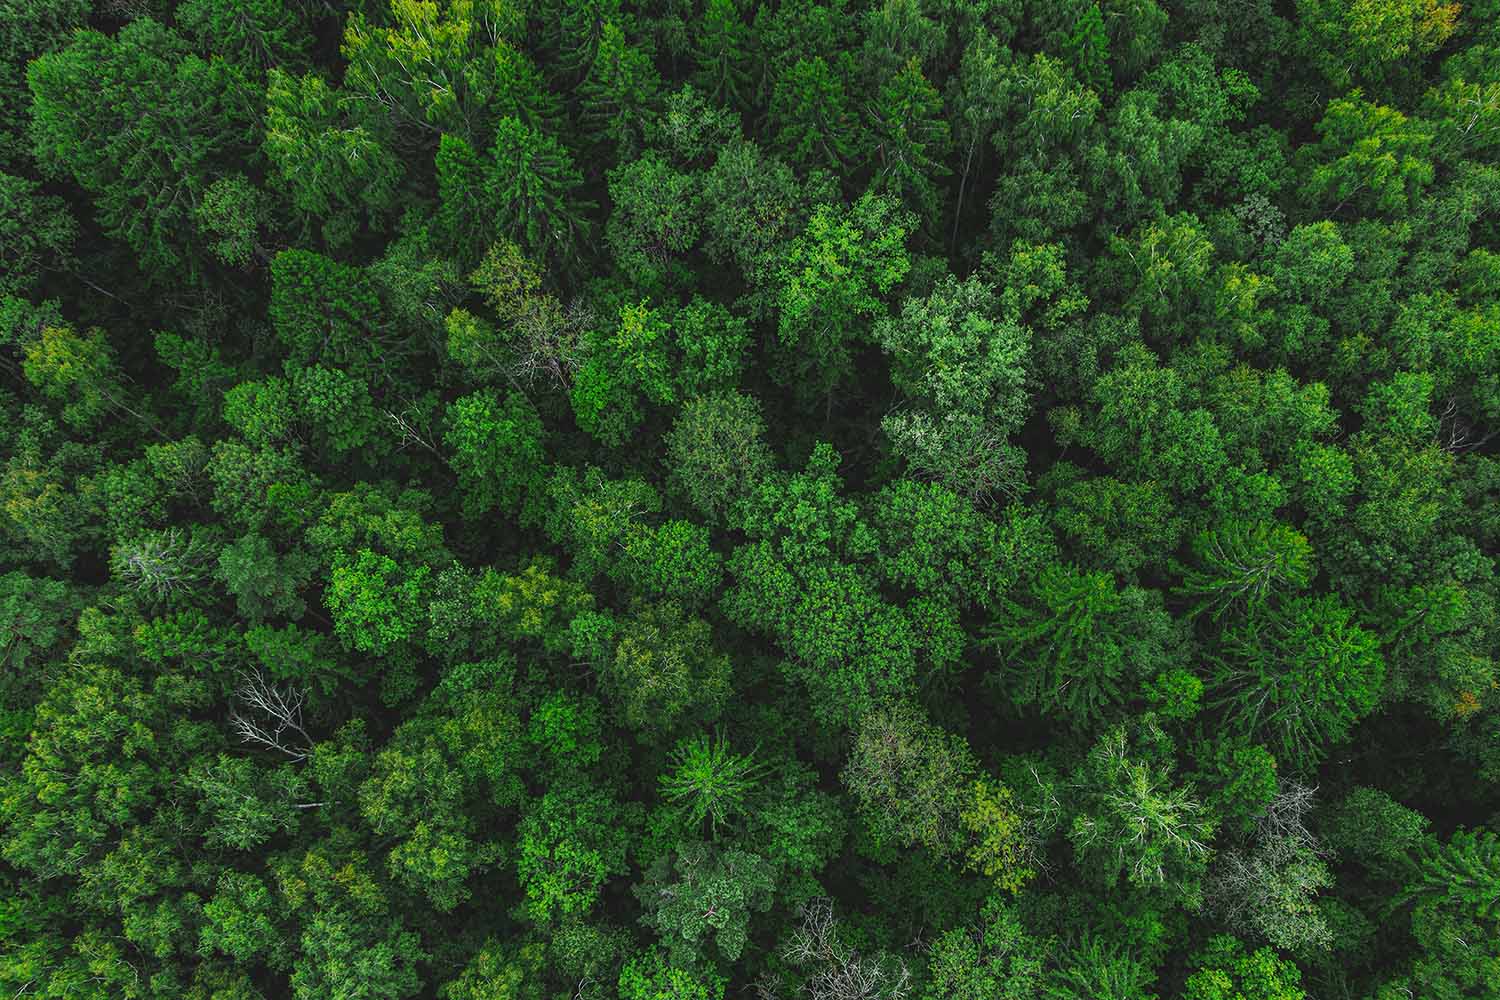 Thick, green forest trees shown from the top.